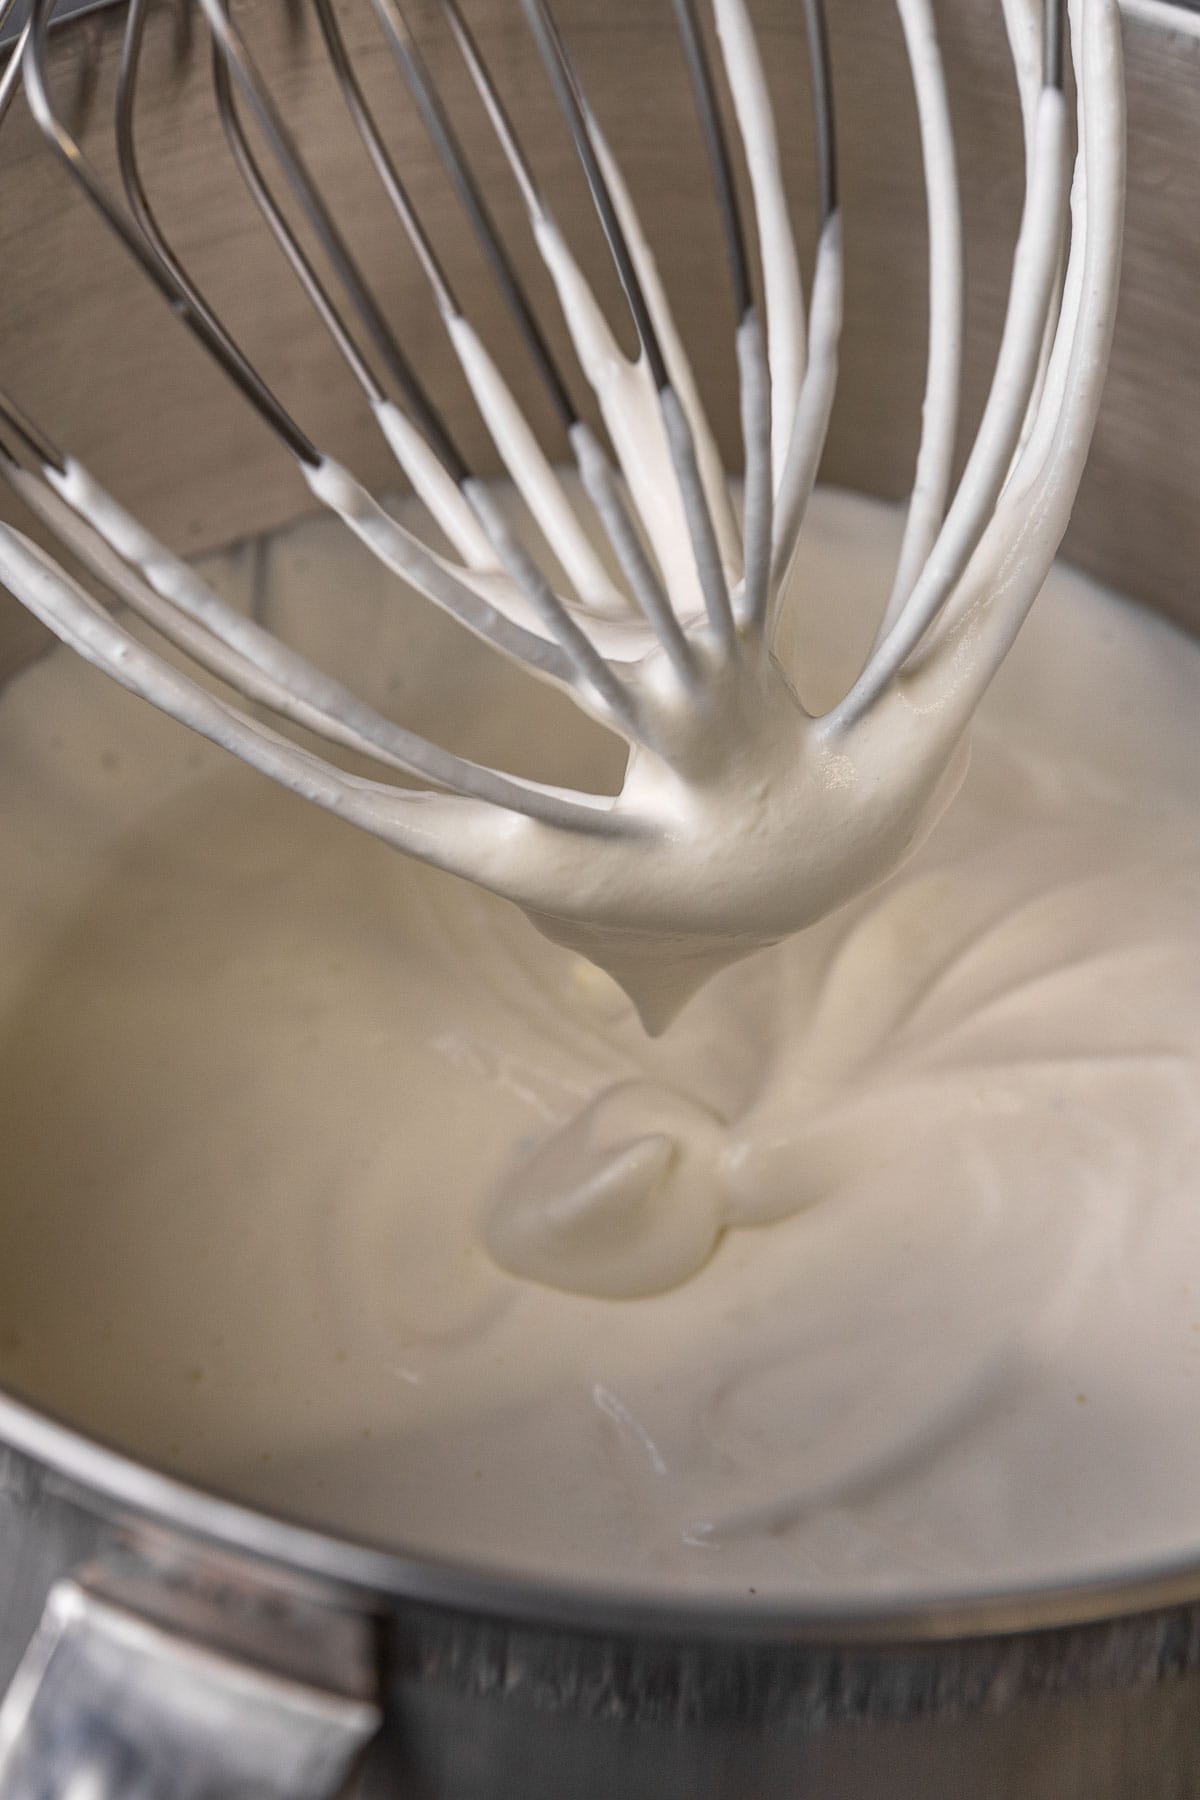 Chocolate Whipped Cream, cream being whipped